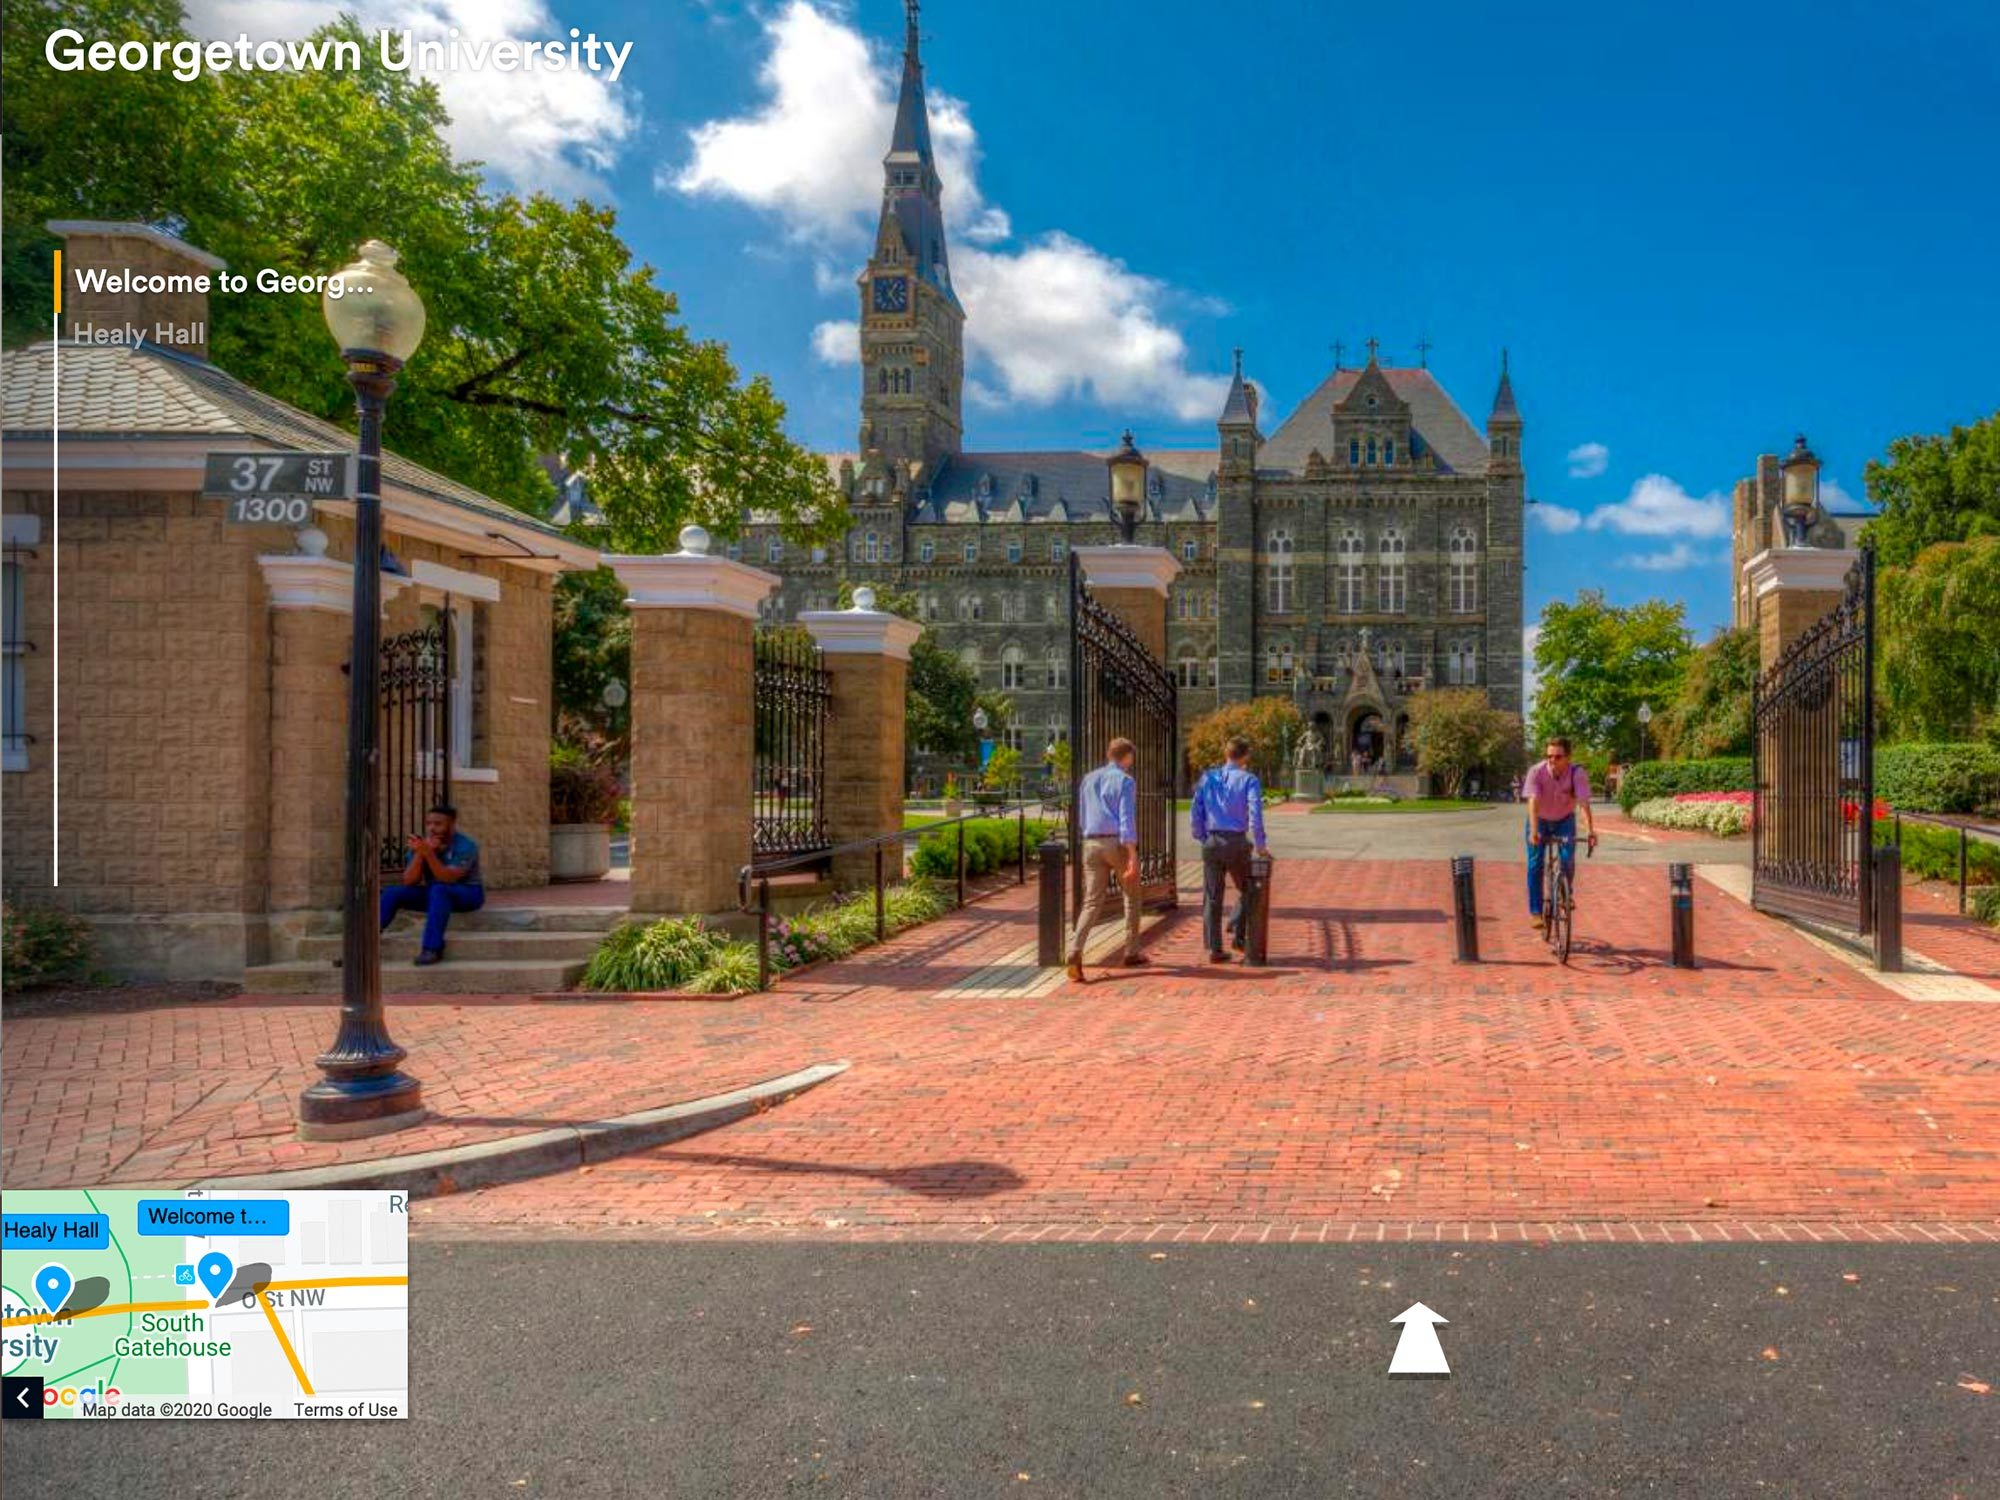 Getting to Know Campus - Georgetown University